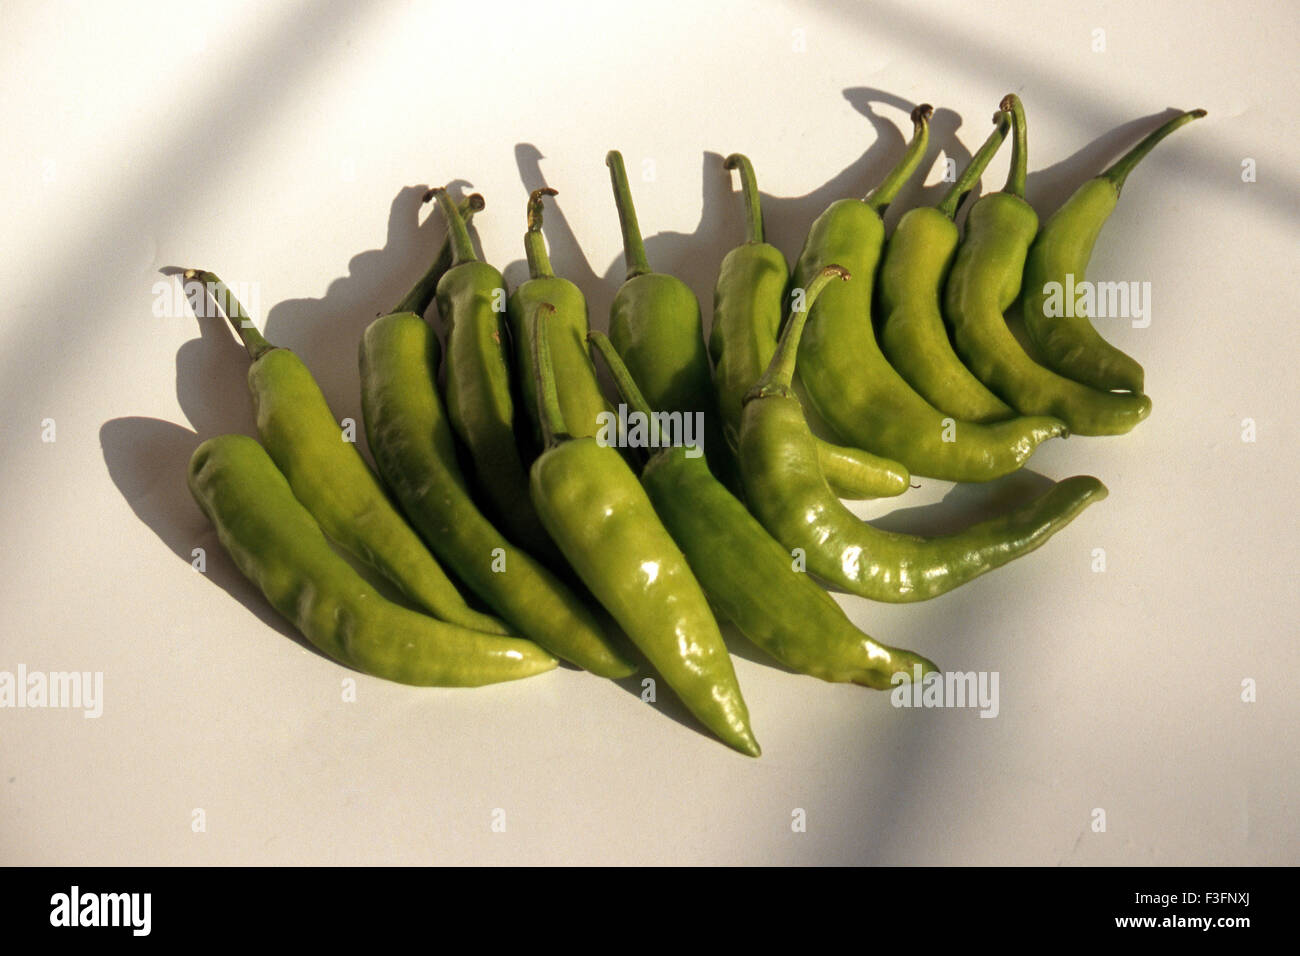 Green chillies on white background Stock Photo